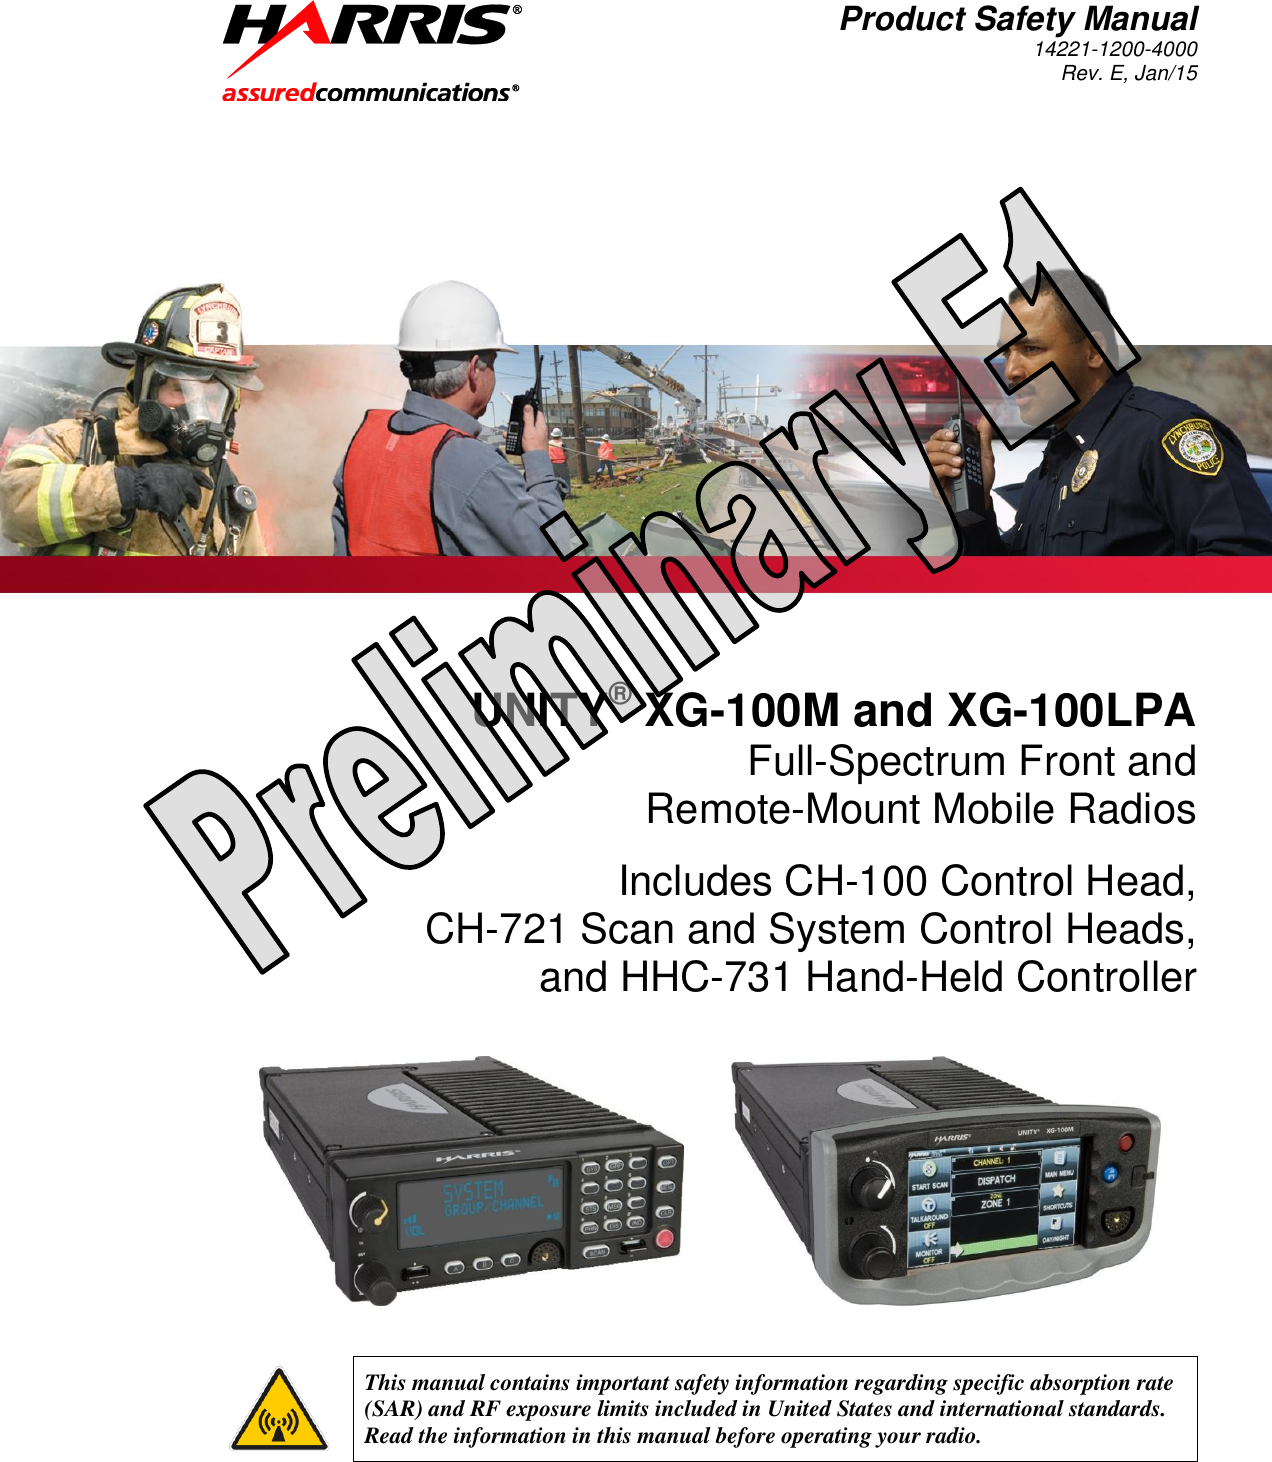 Product Safety Manual 14221-1200-4000 Rev. E, Jan/15   UNITY® XG-100M and XG-100LPA Full-Spectrum Front and Remote-Mount Mobile Radios Includes CH-100 Control Head, CH-721 Scan and System Control Heads, and HHC-731 Hand-Held Controller                          This manual contains important safety information regarding specific absorption rate (SAR) and RF exposure limits included in United States and international standards.  Read the information in this manual before operating your radio.  